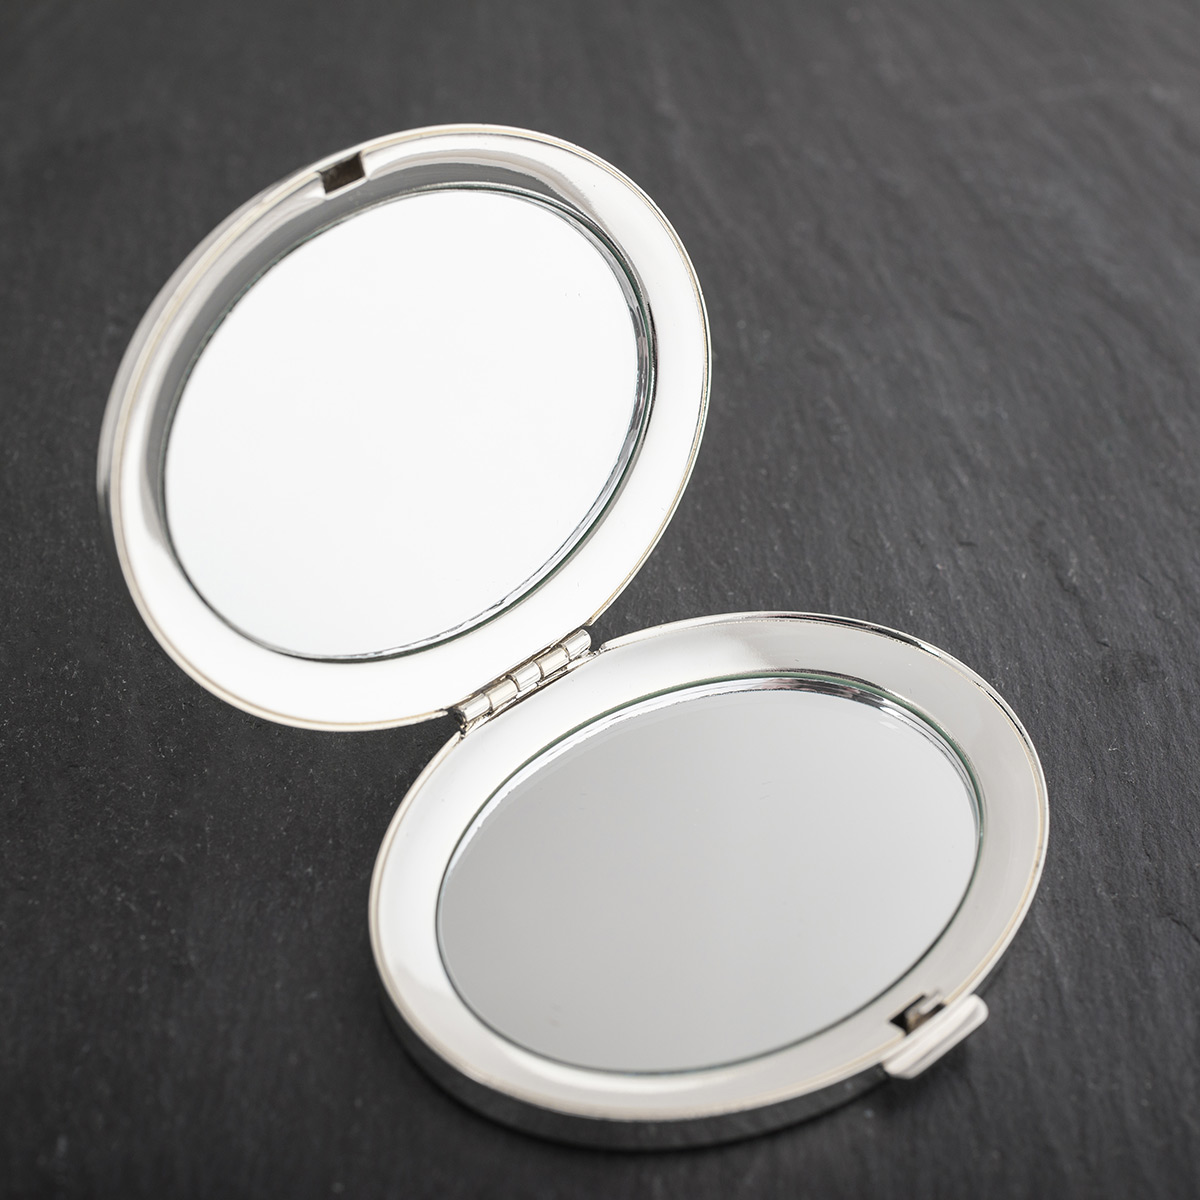 Personalised Engraved Silver Oval Compact Mirror With Hearts